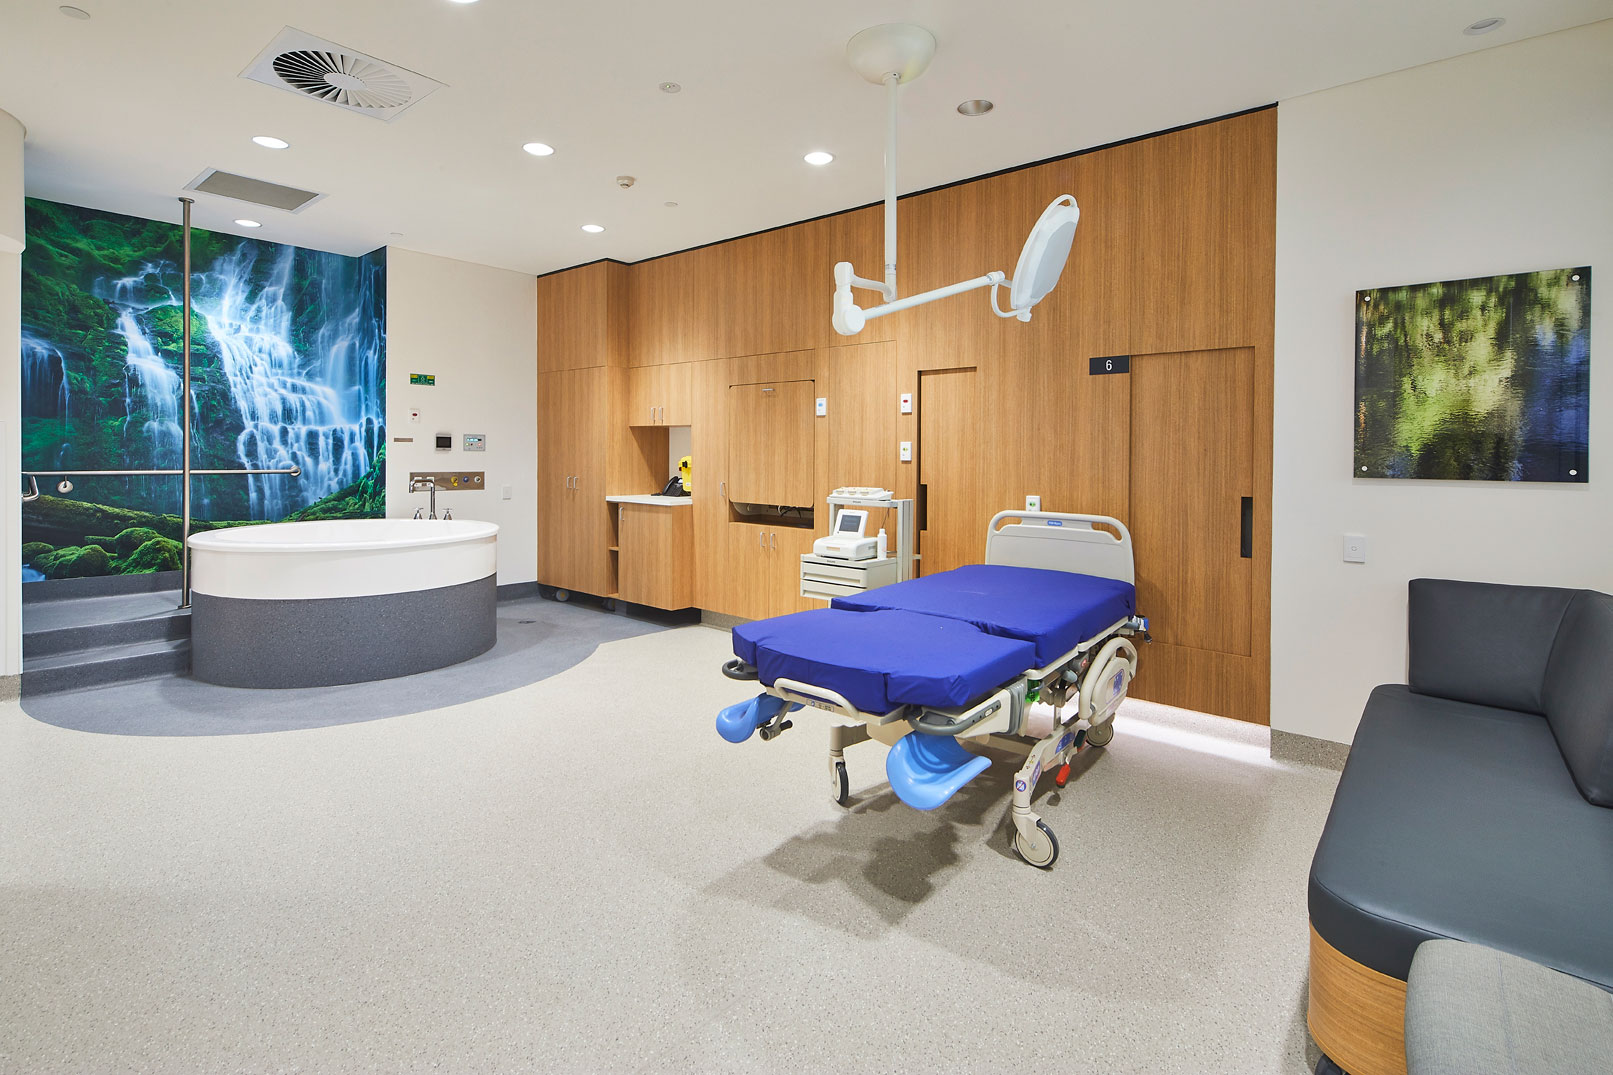 St George Hospital Birthing Suite and Theatre